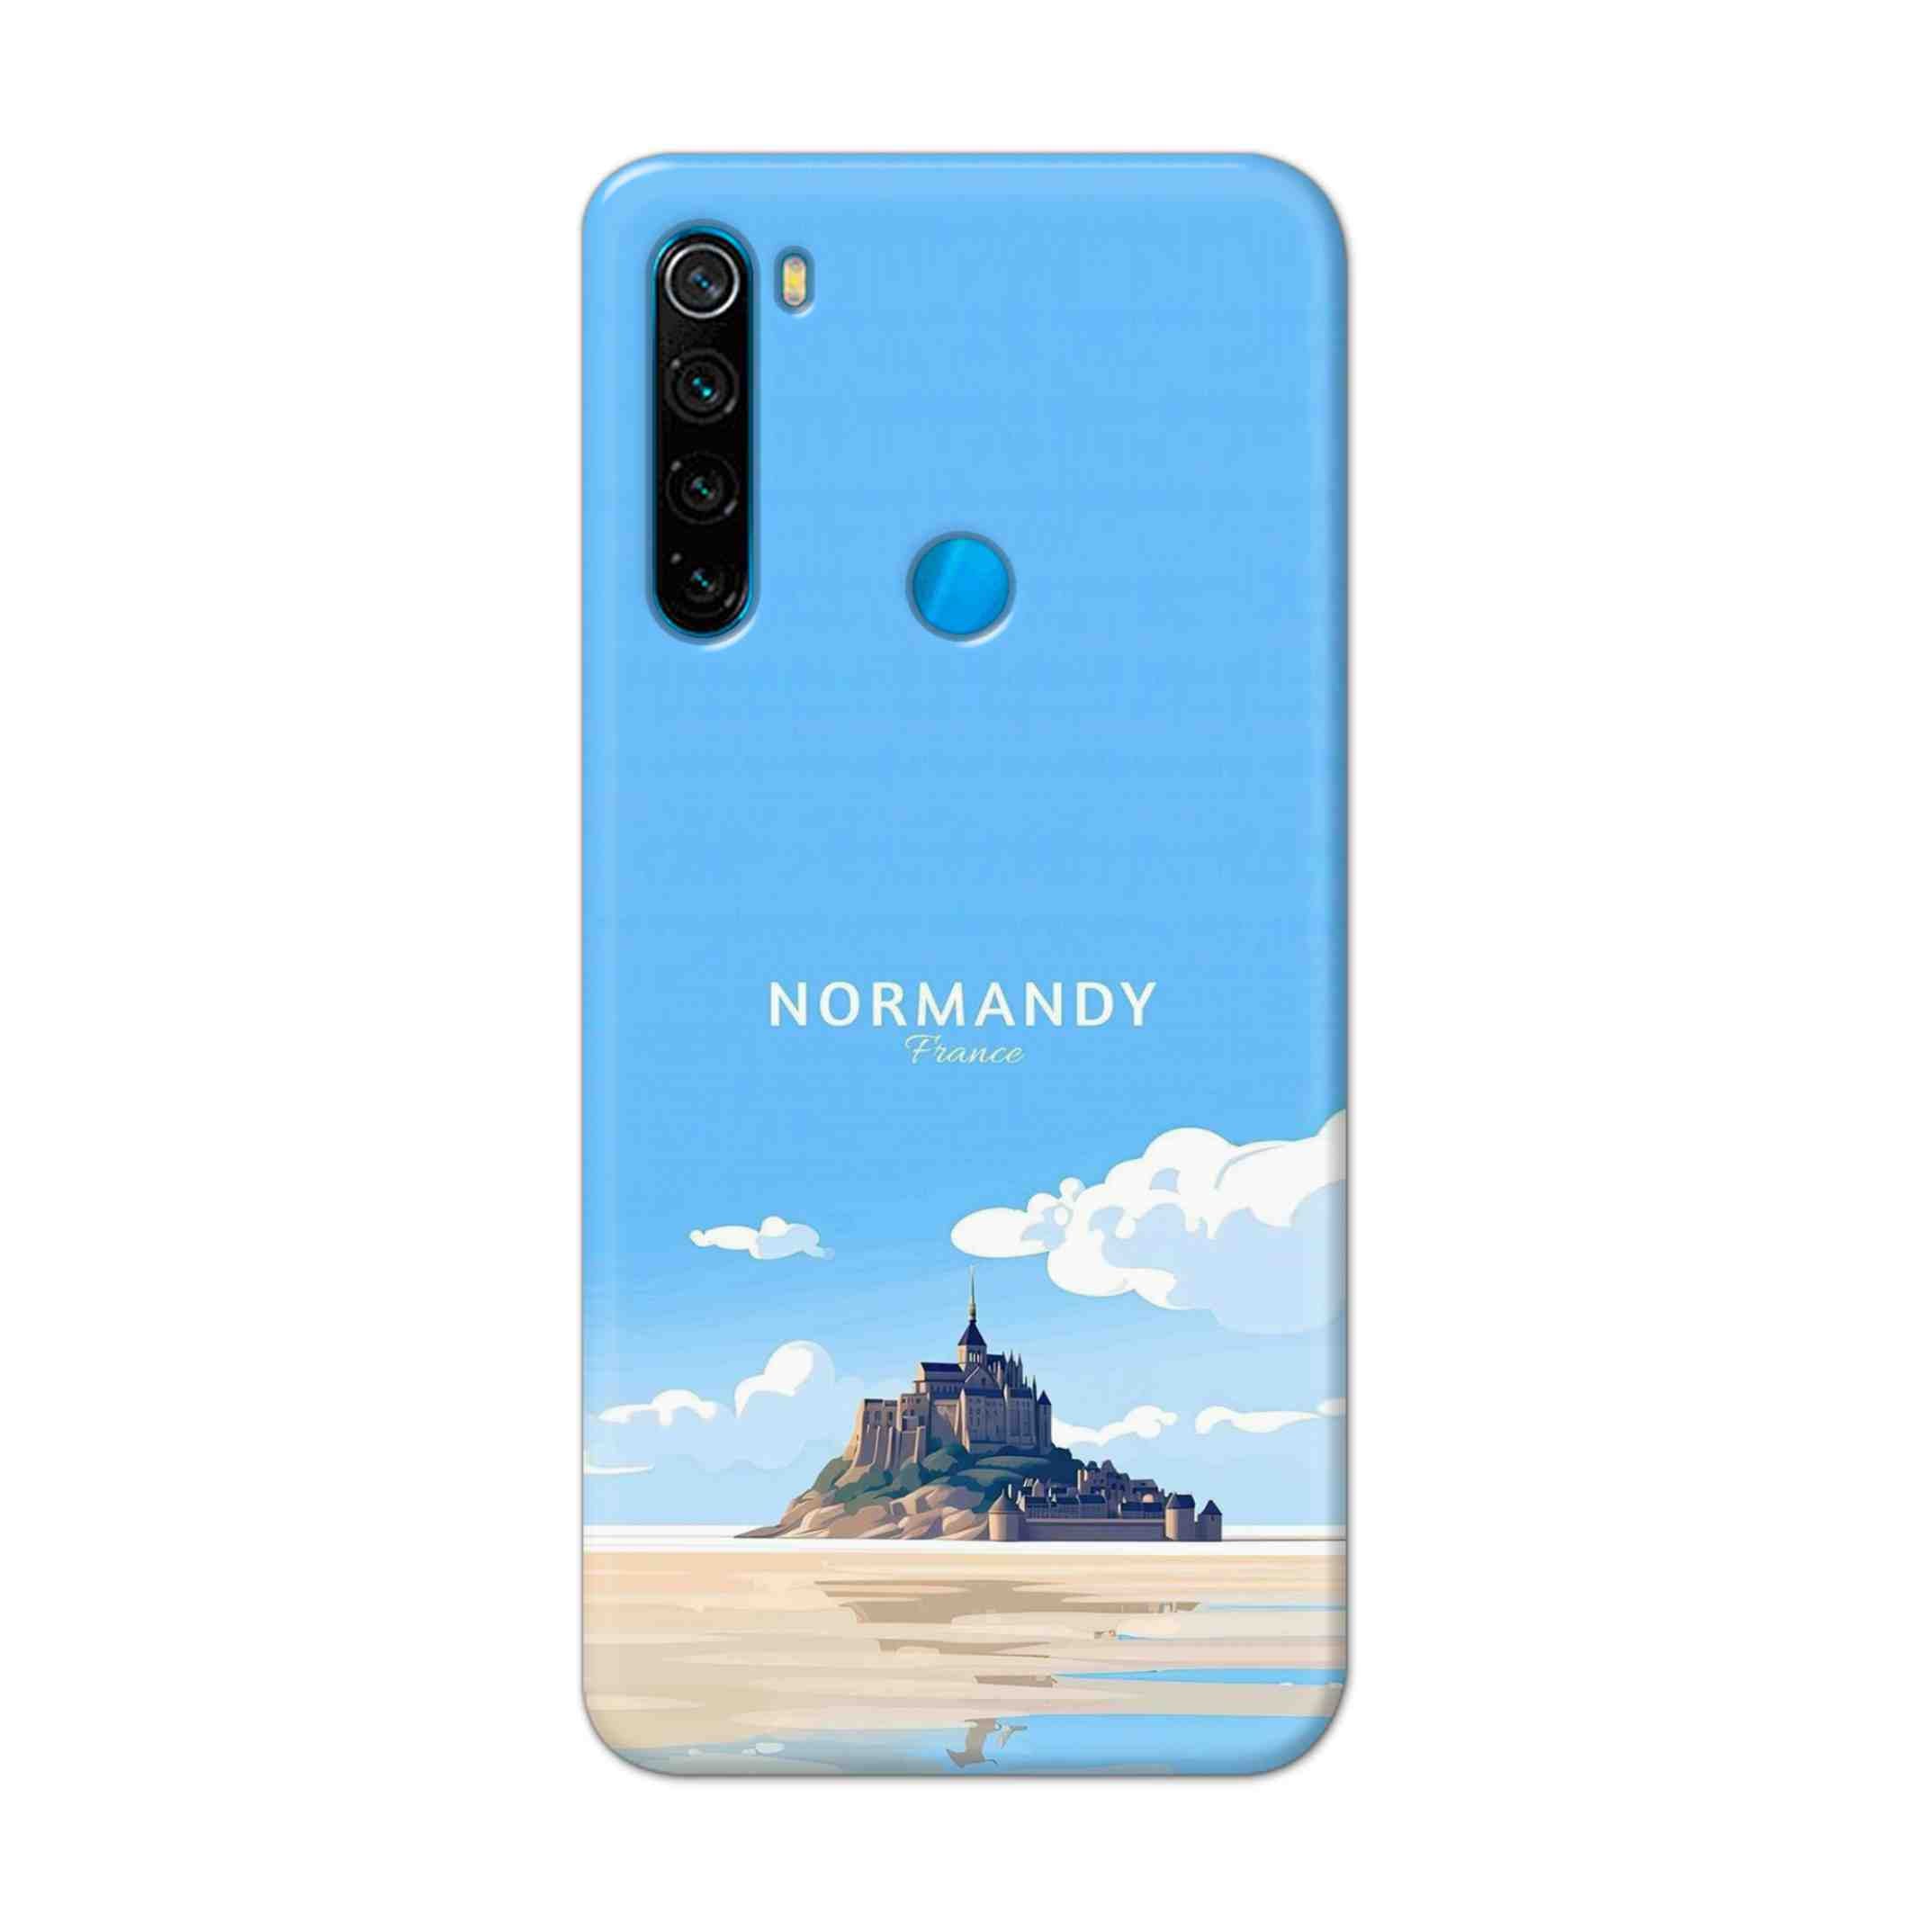 Buy Normandy Hard Back Mobile Phone Case Cover For Xiaomi Redmi Note 8 Online